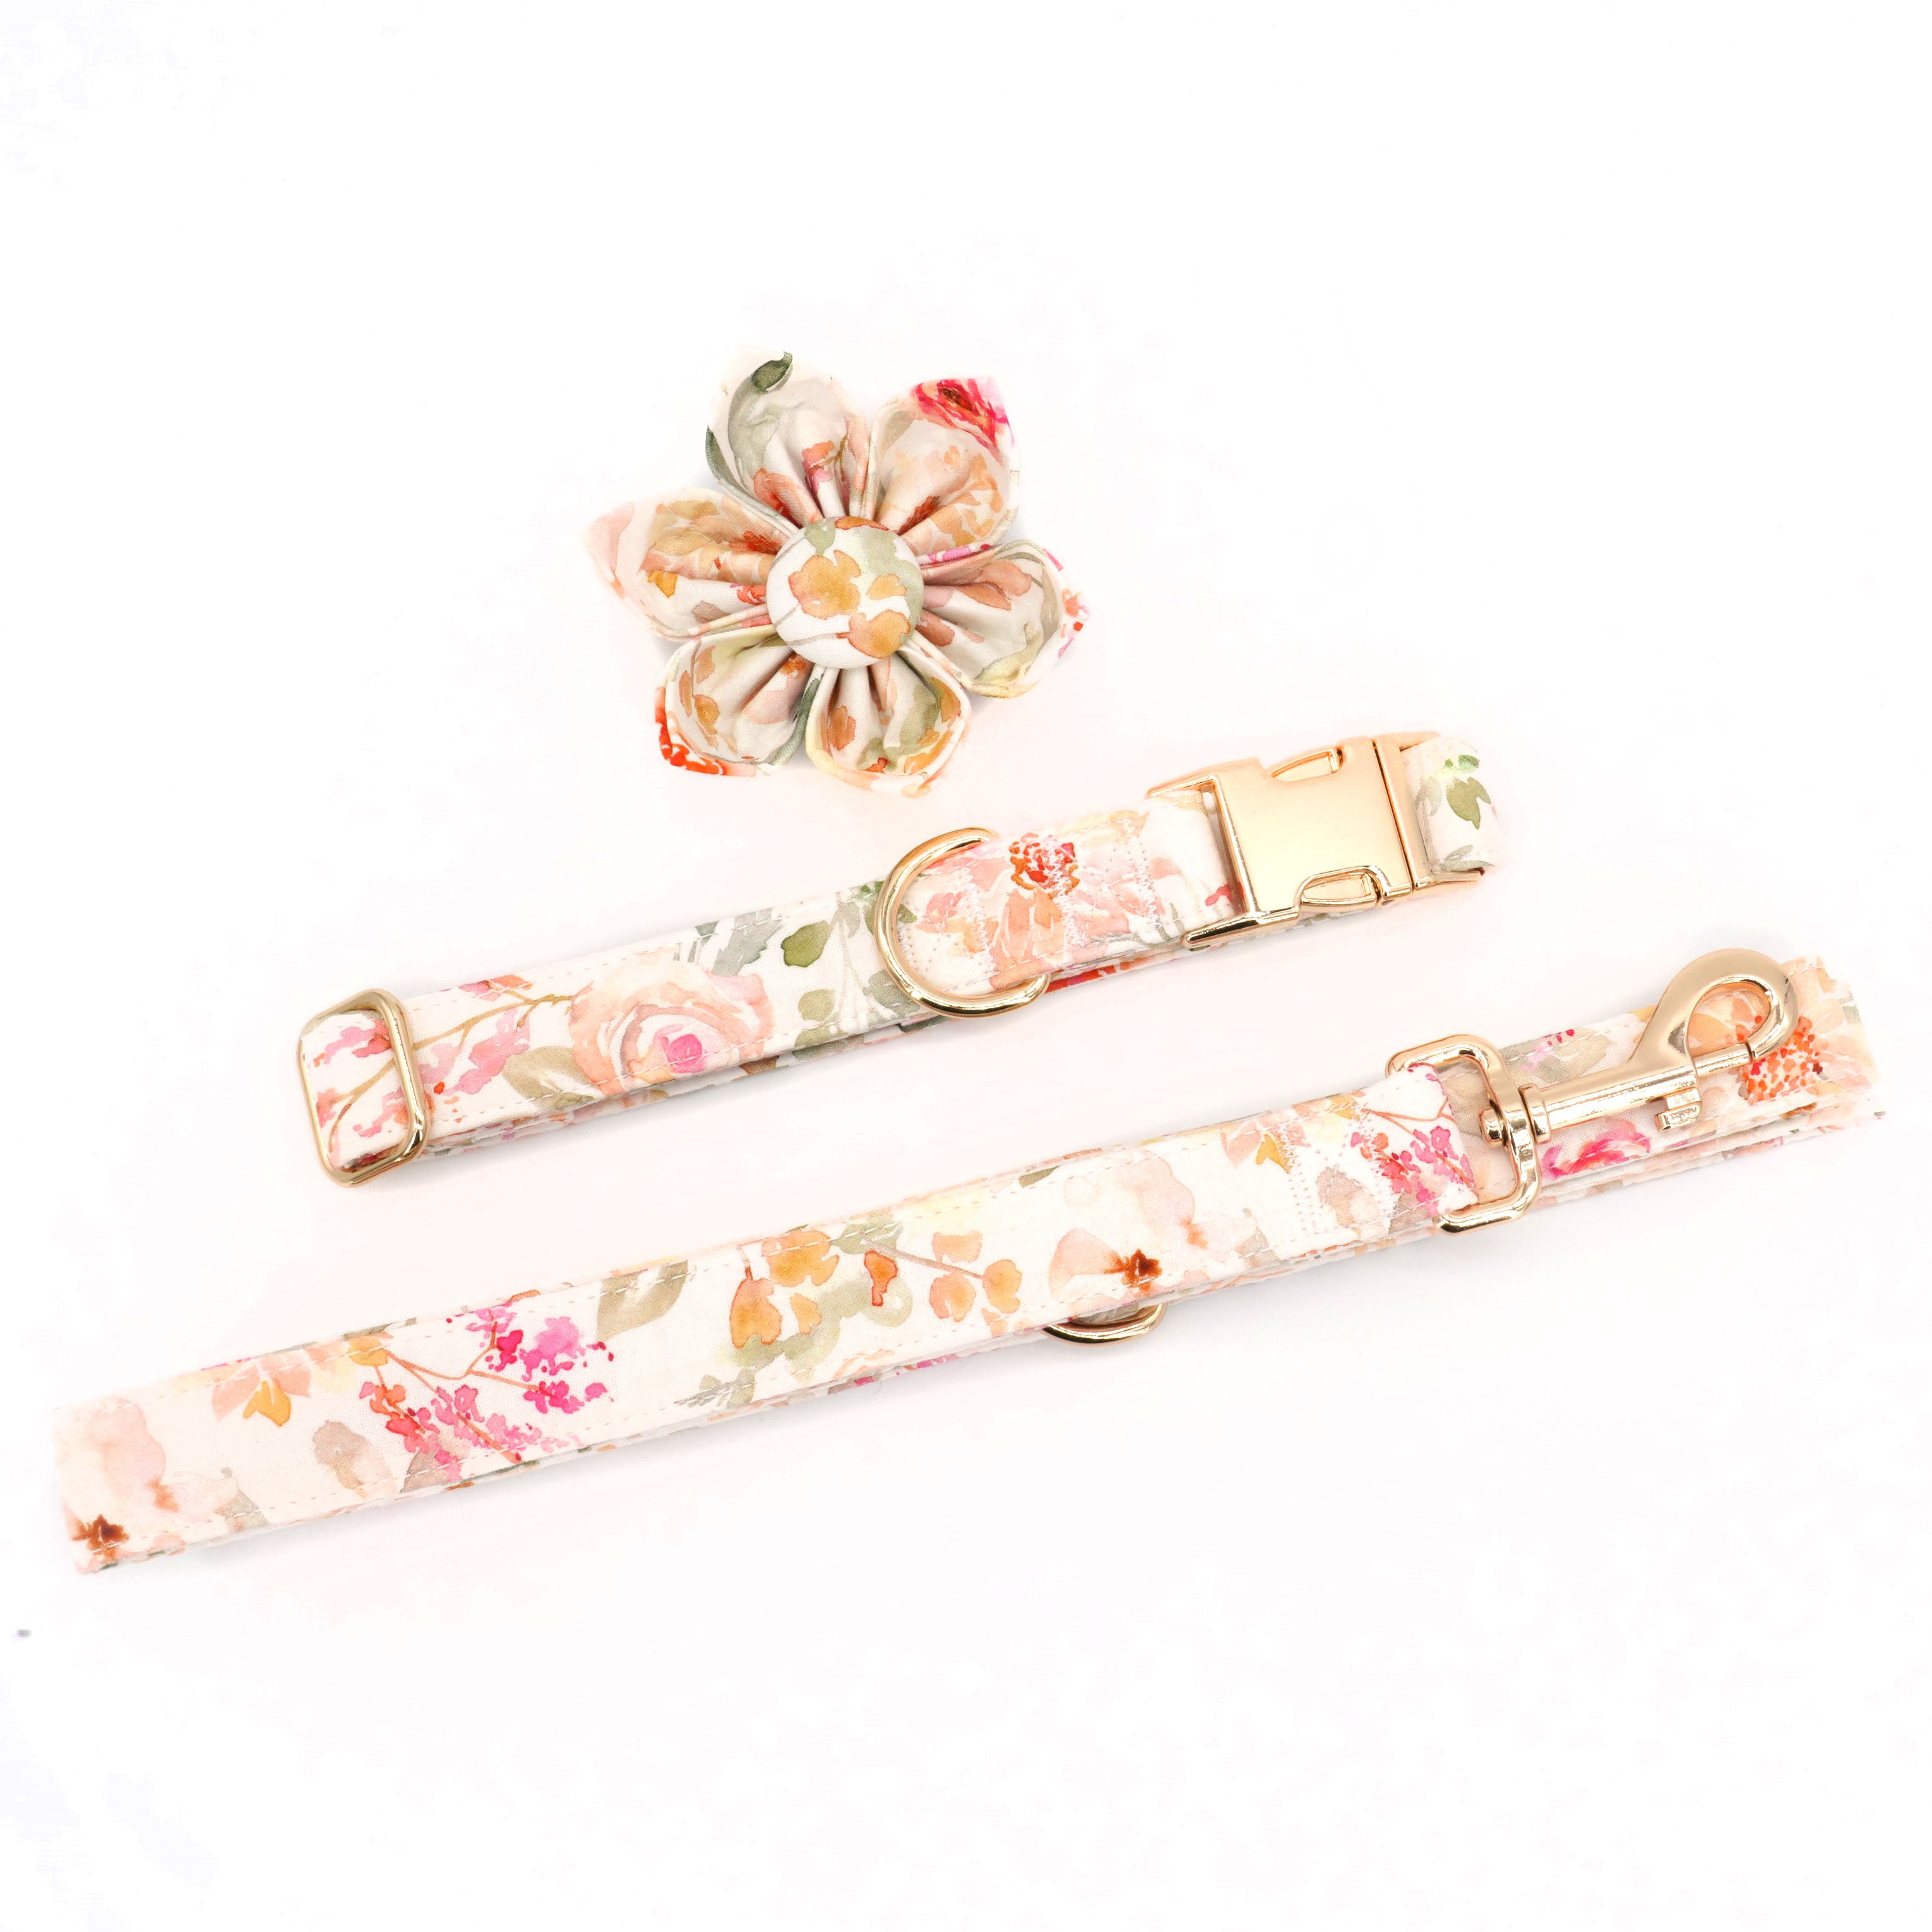 Floral Elite: Personalized Collar And Leash